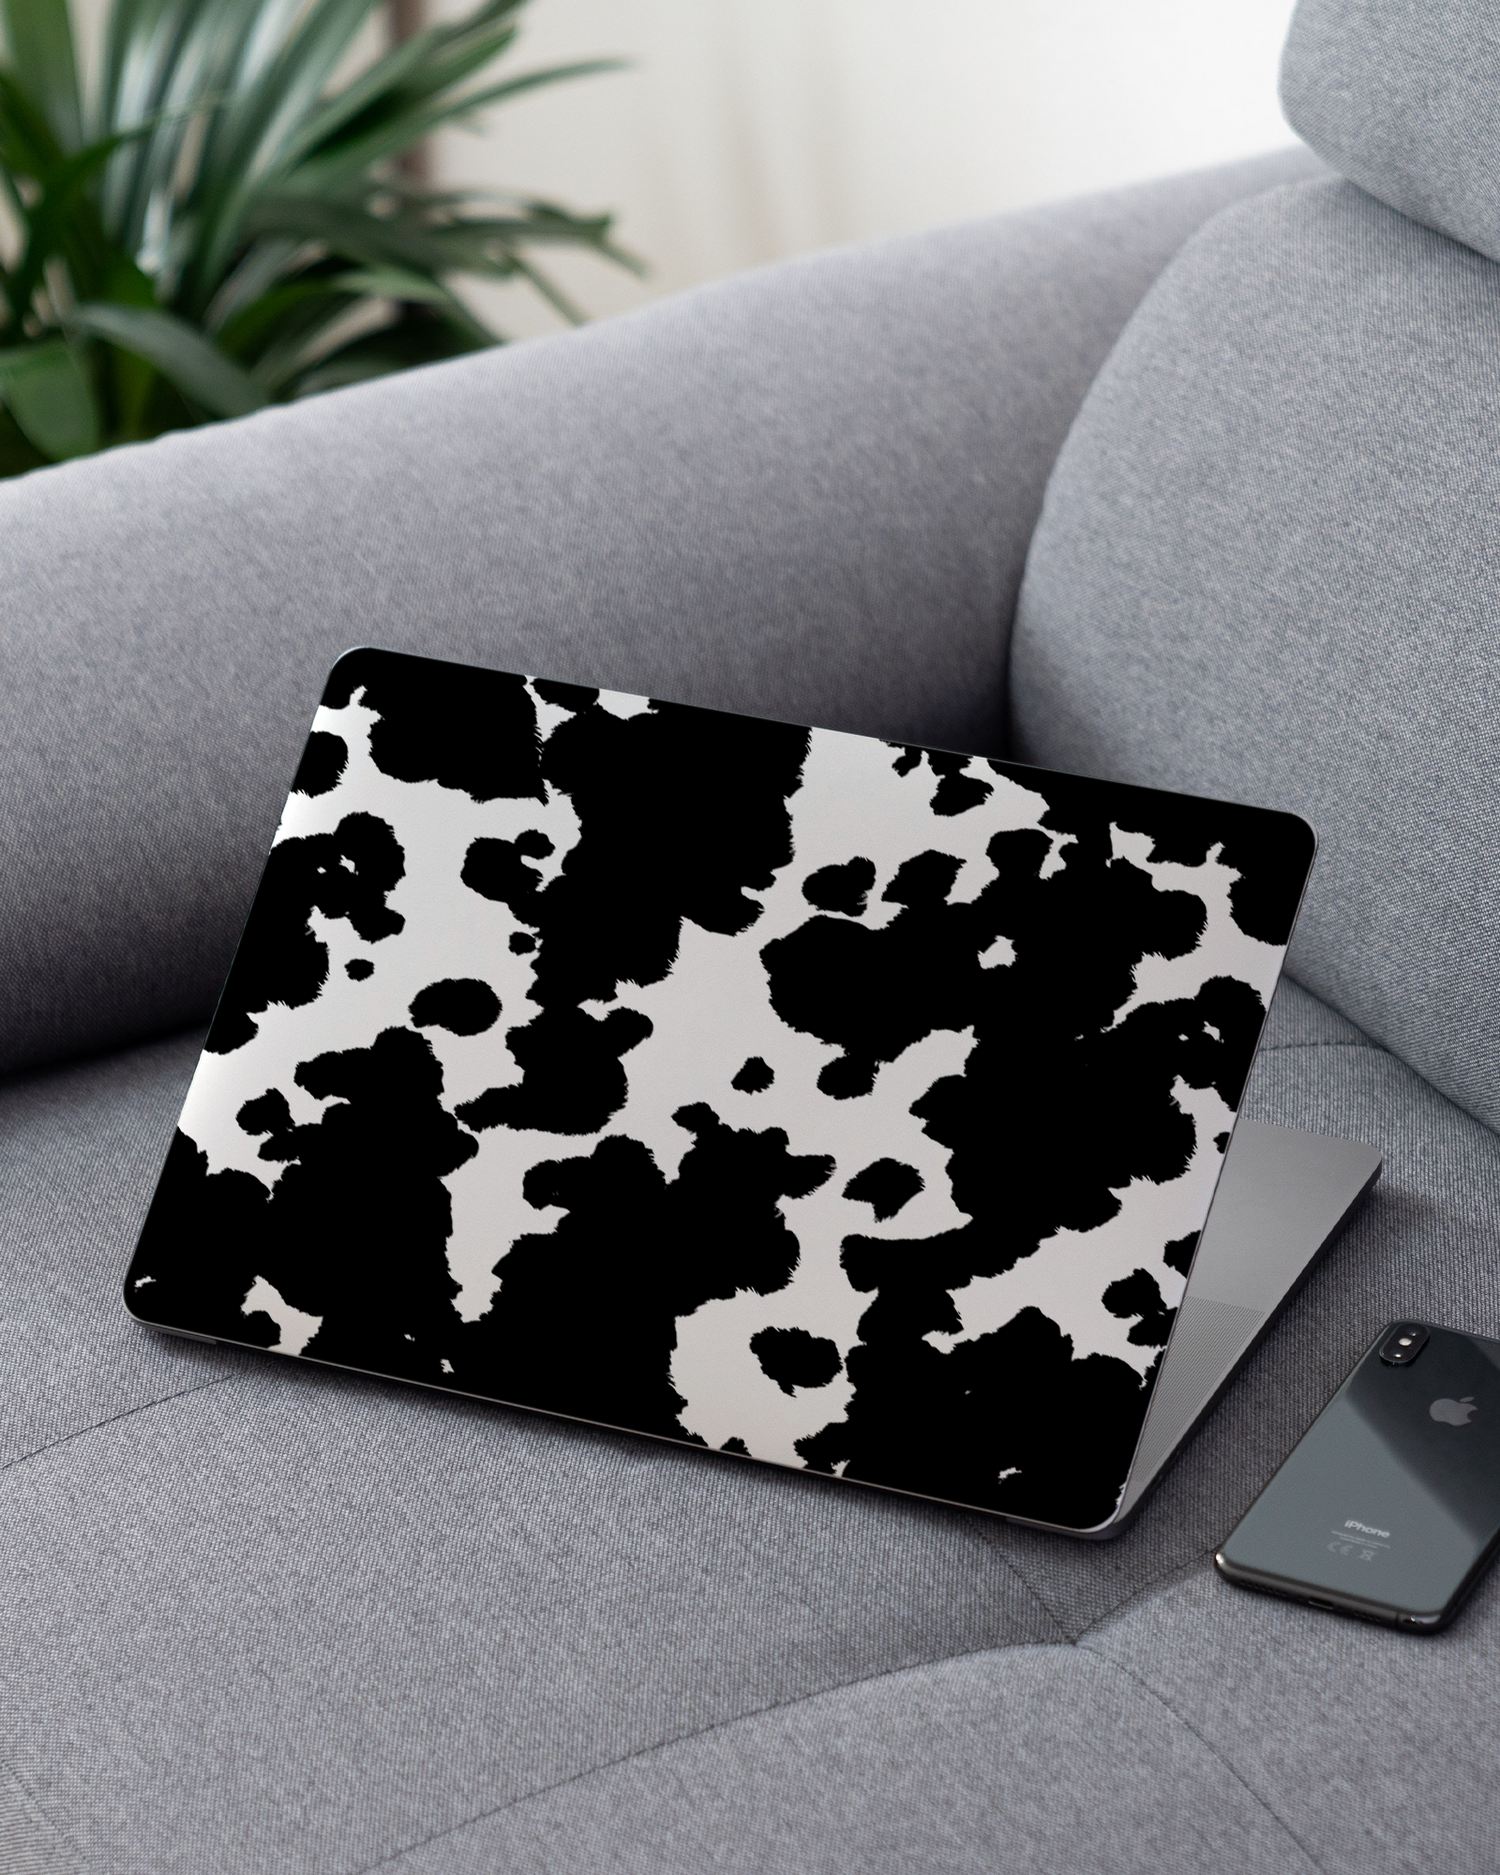 Cow Print Laptop Skin for 13 inch Apple MacBooks on a couch